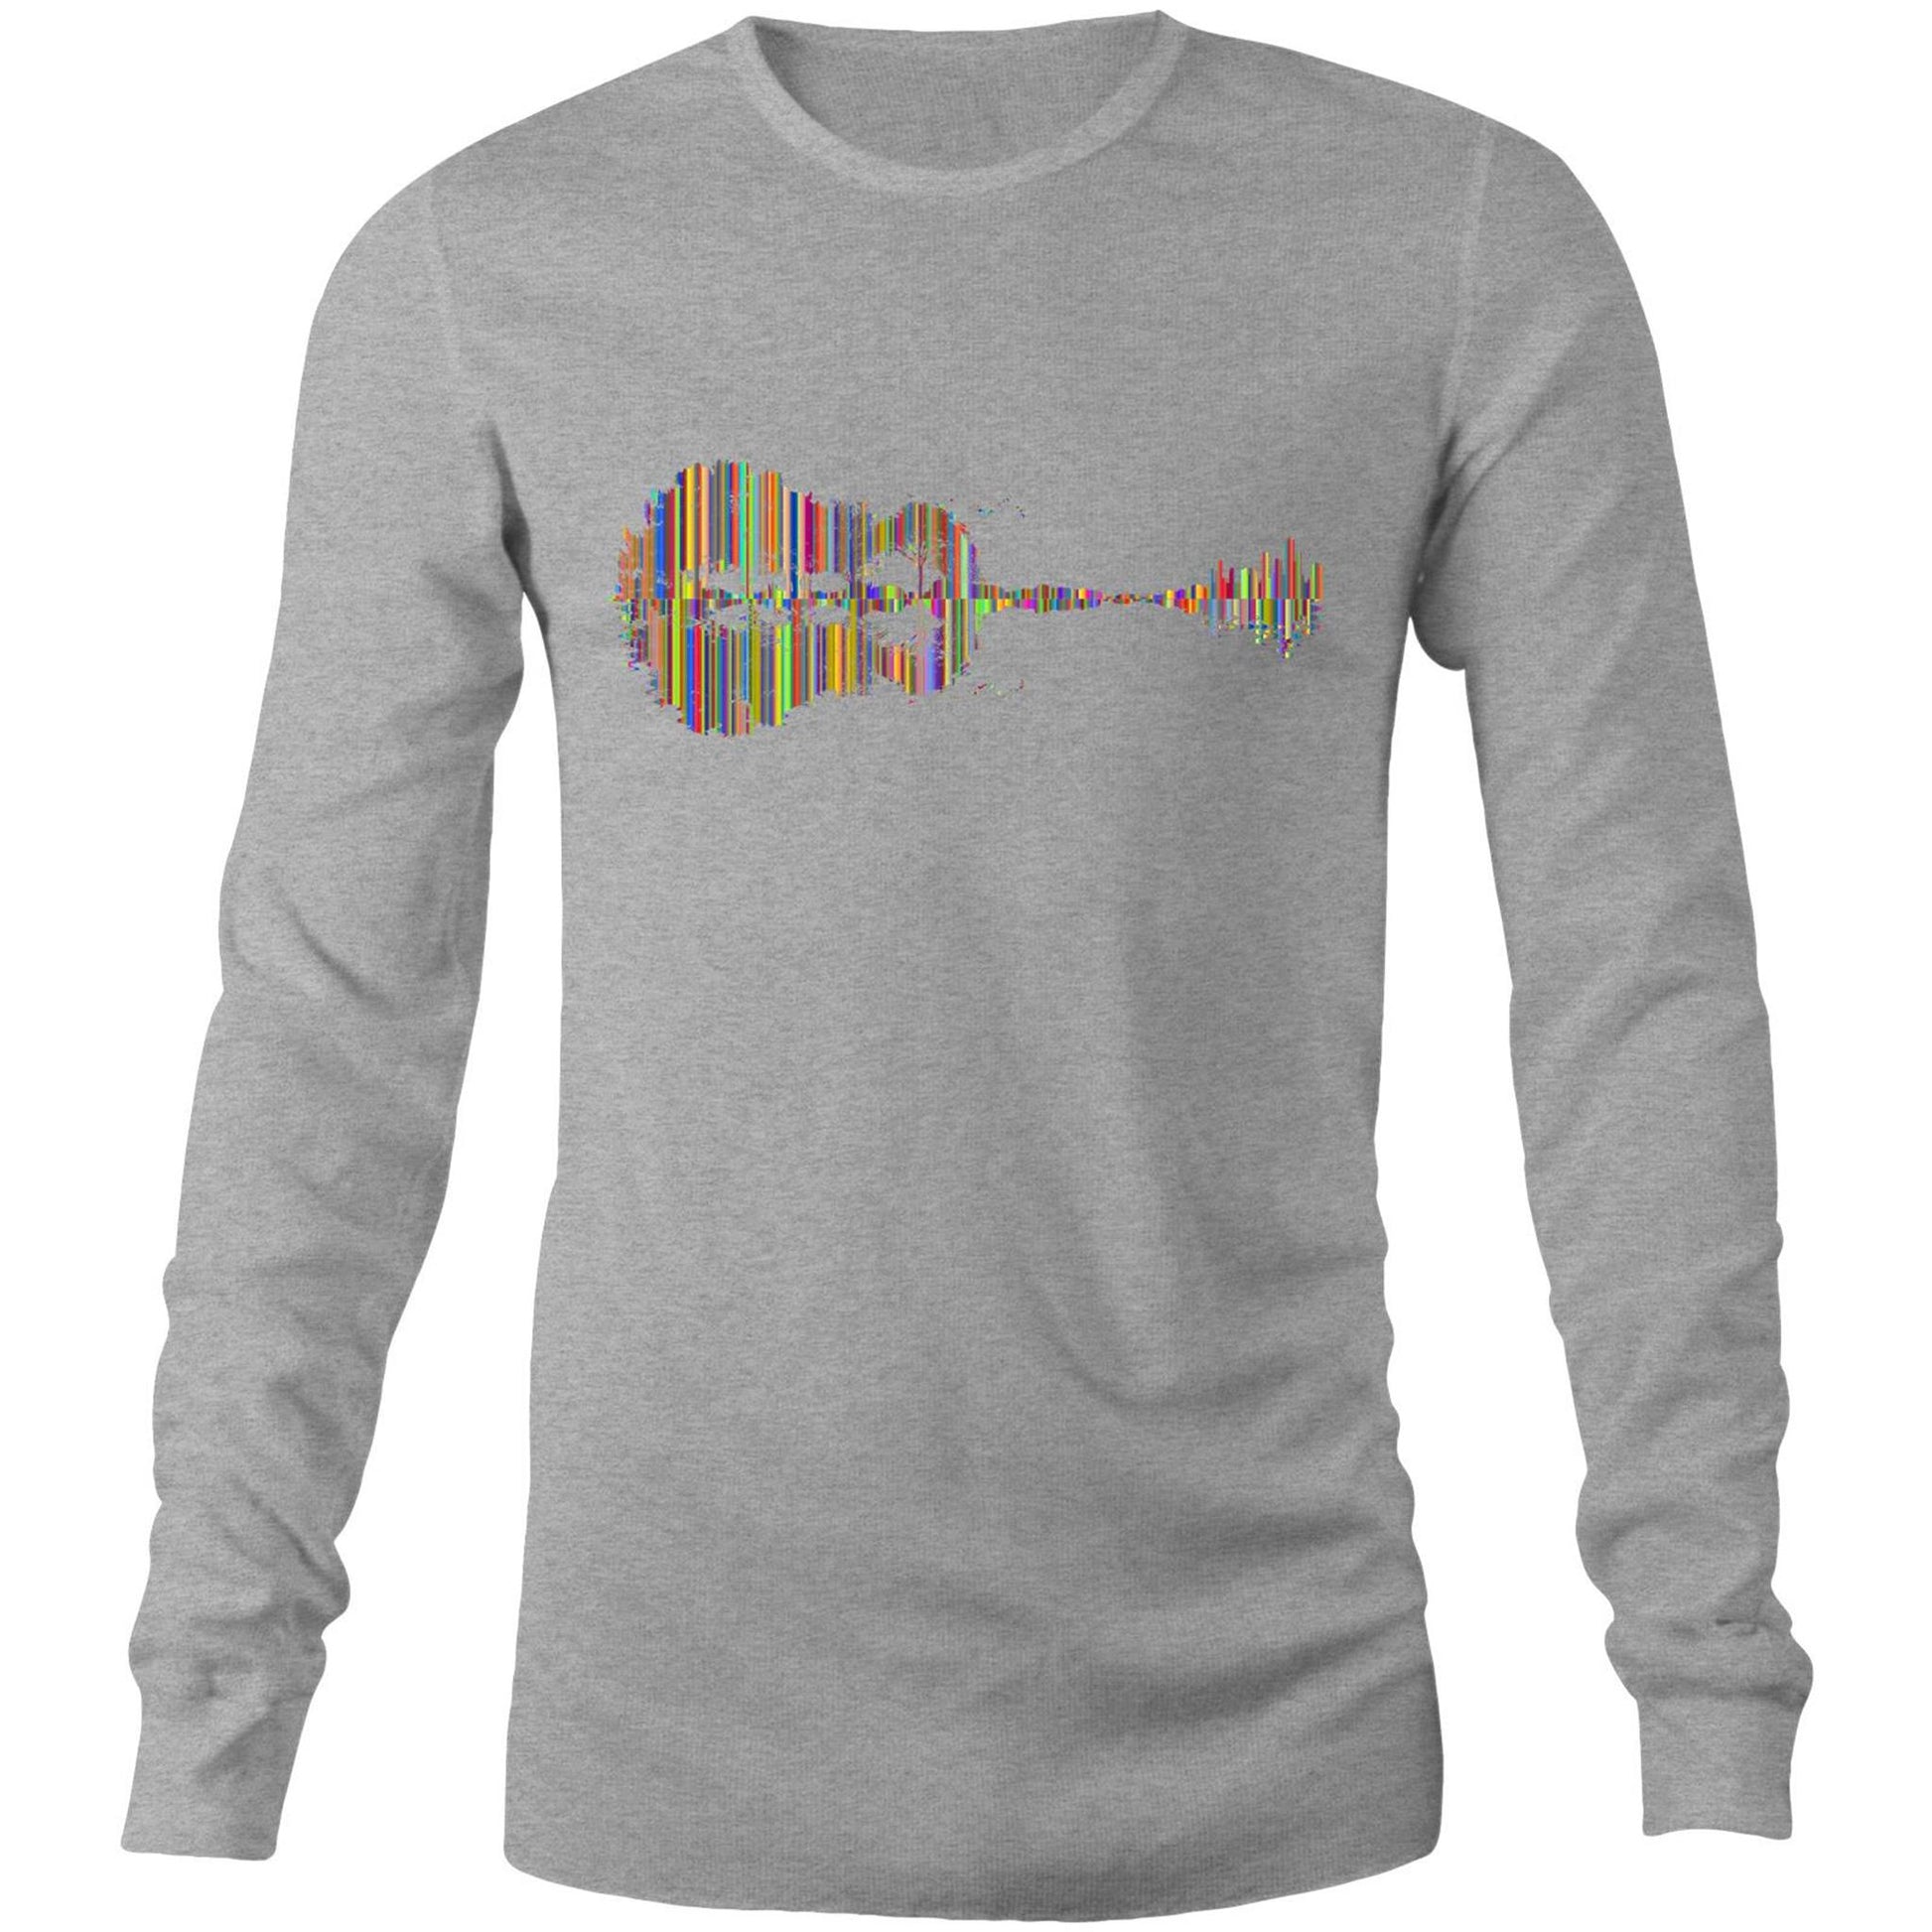 Guitar Reflection In Colour - Long Sleeve T-Shirt Grey Marle Unisex Long Sleeve T-shirt Music